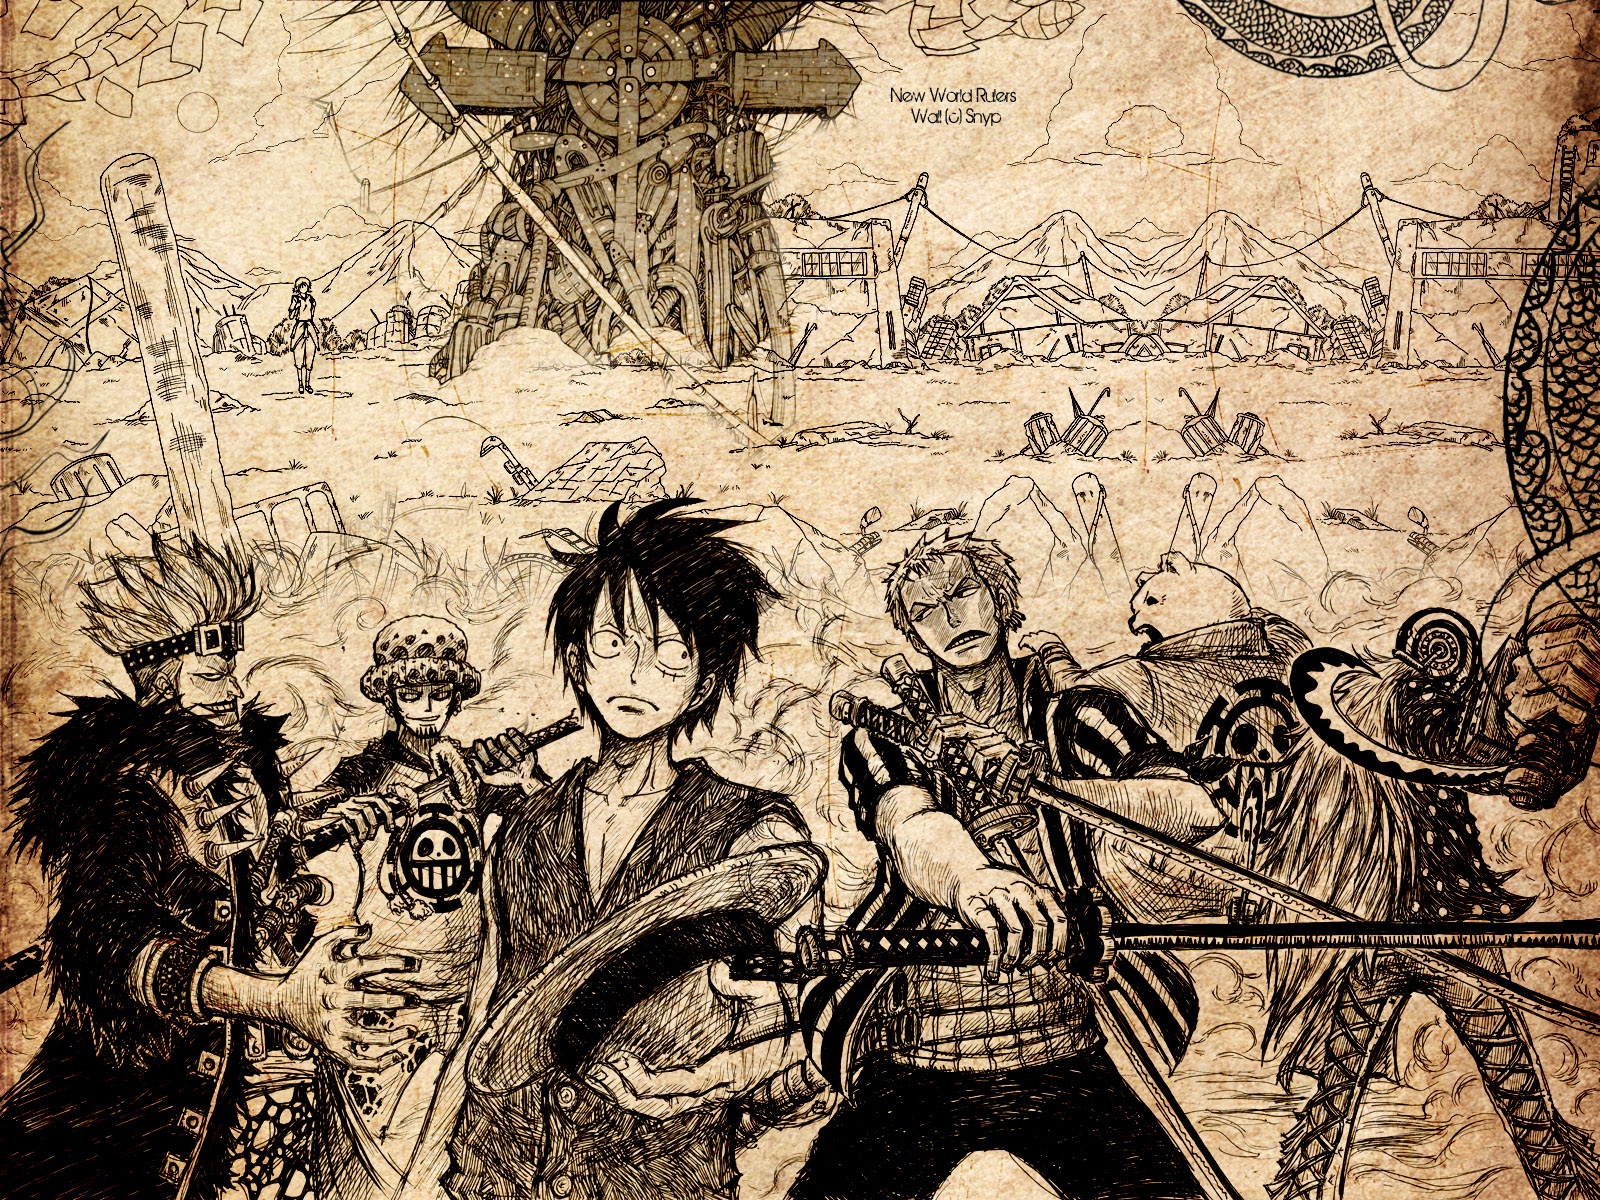 One Piece characters, including Luffy, Zoro, Law, Kid, Killer, and Bepo, stand together in this anime-inspired desktop wallpaper.